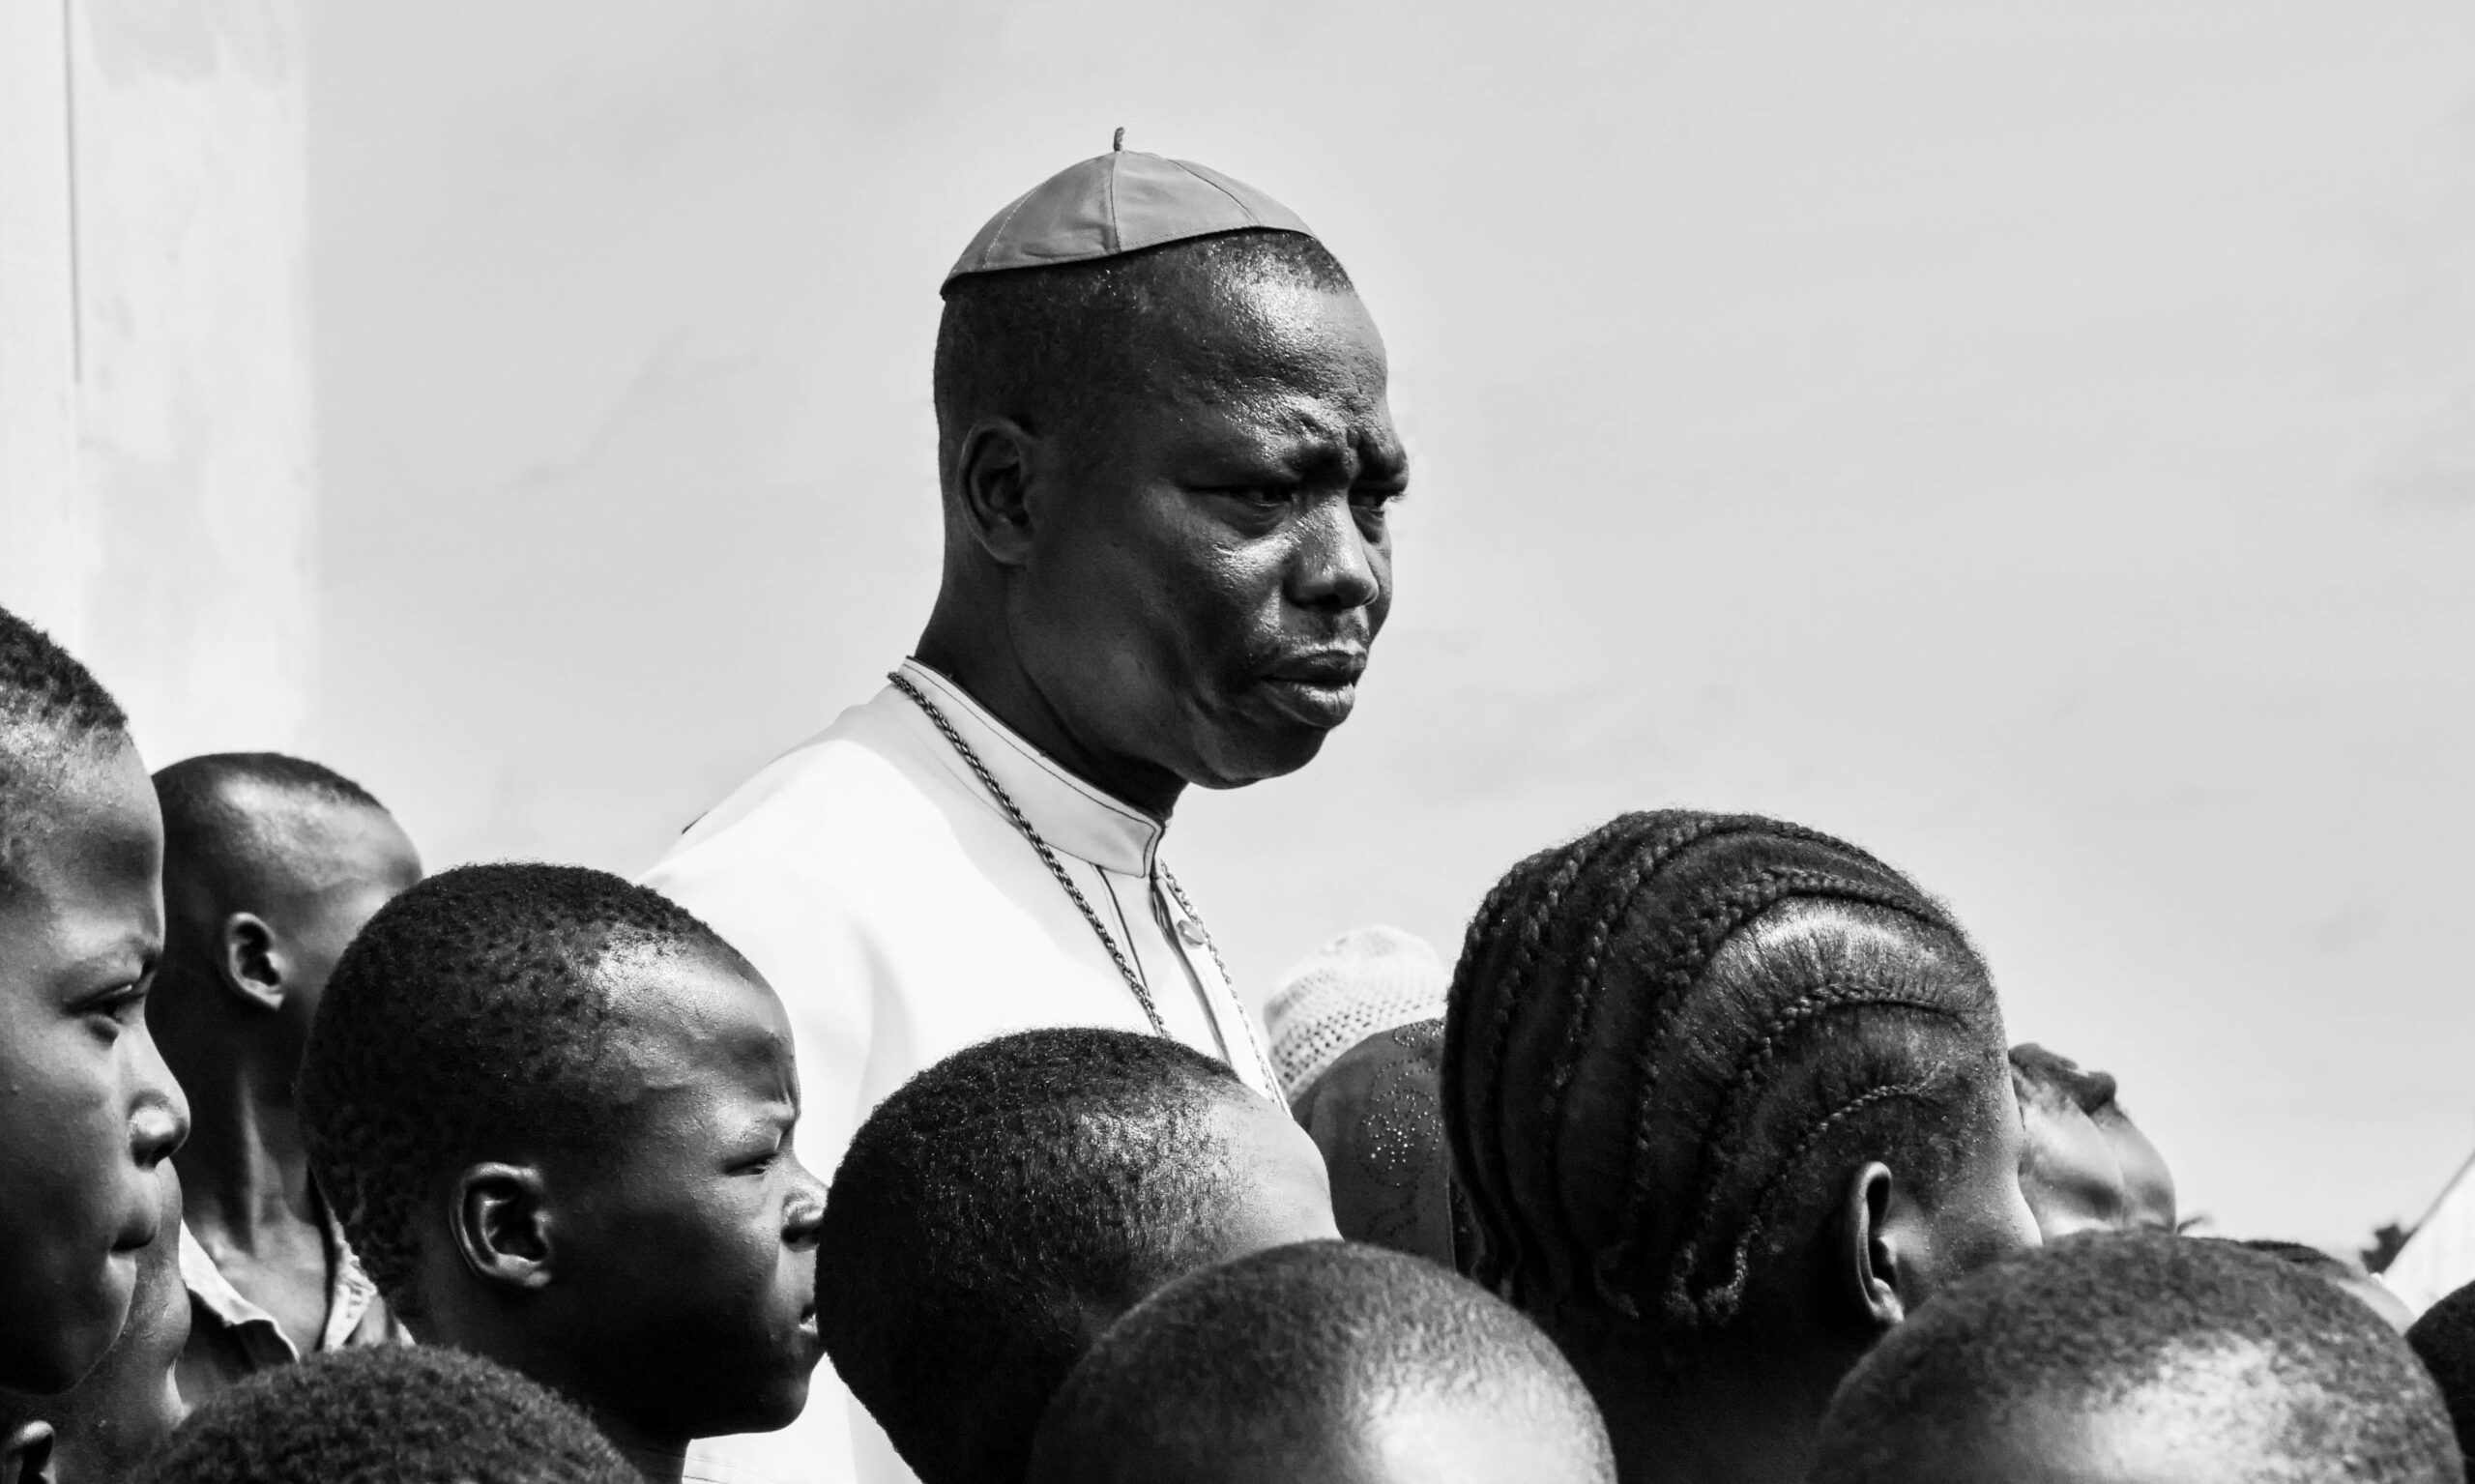 Featured image for “Threatened Nigerian Bishop Pleads for Attention From the West”